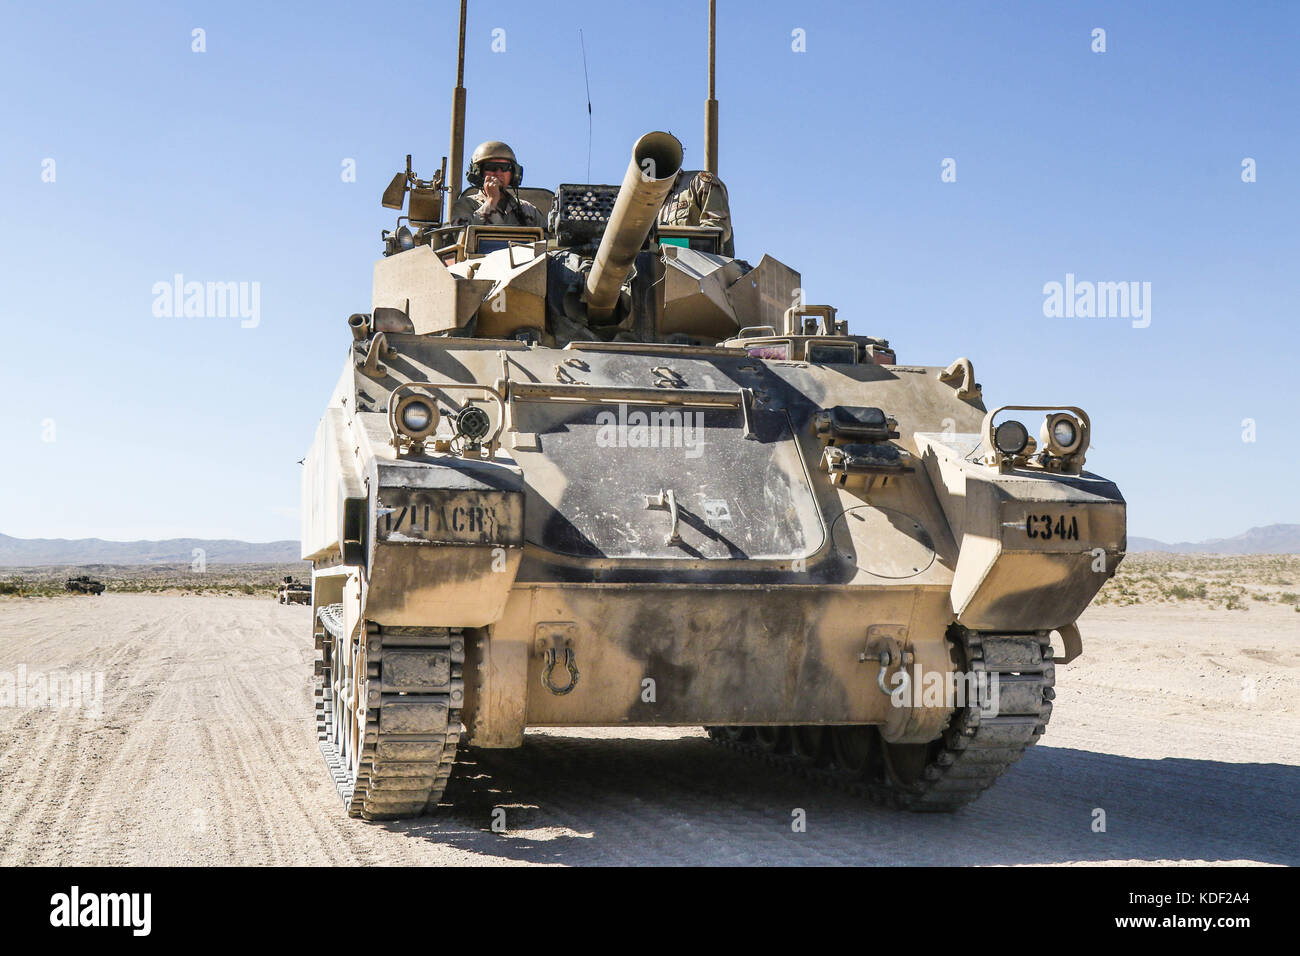 U.S. soldiers drive Opposing Force Surrogate Vehicles designed to replicate Russian military armored vehicles during assault training near the John Wayne Foothills at the Fort Irwin National Training Center July 1, 2017 in Fort Irwin, California.   (photo by Austin Anyzeski via Planetpix) Stock Photo